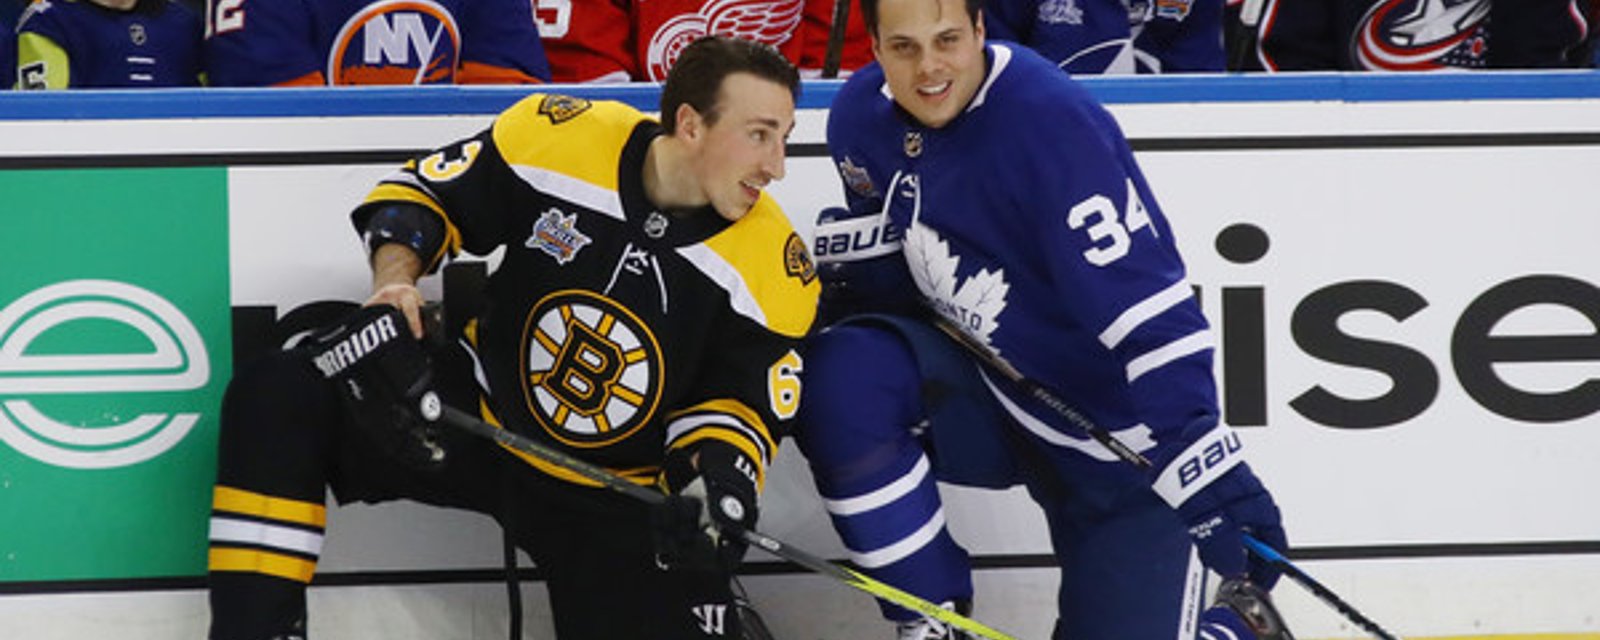 Matthews agrees with Marchand, who trolled the Leafs! 